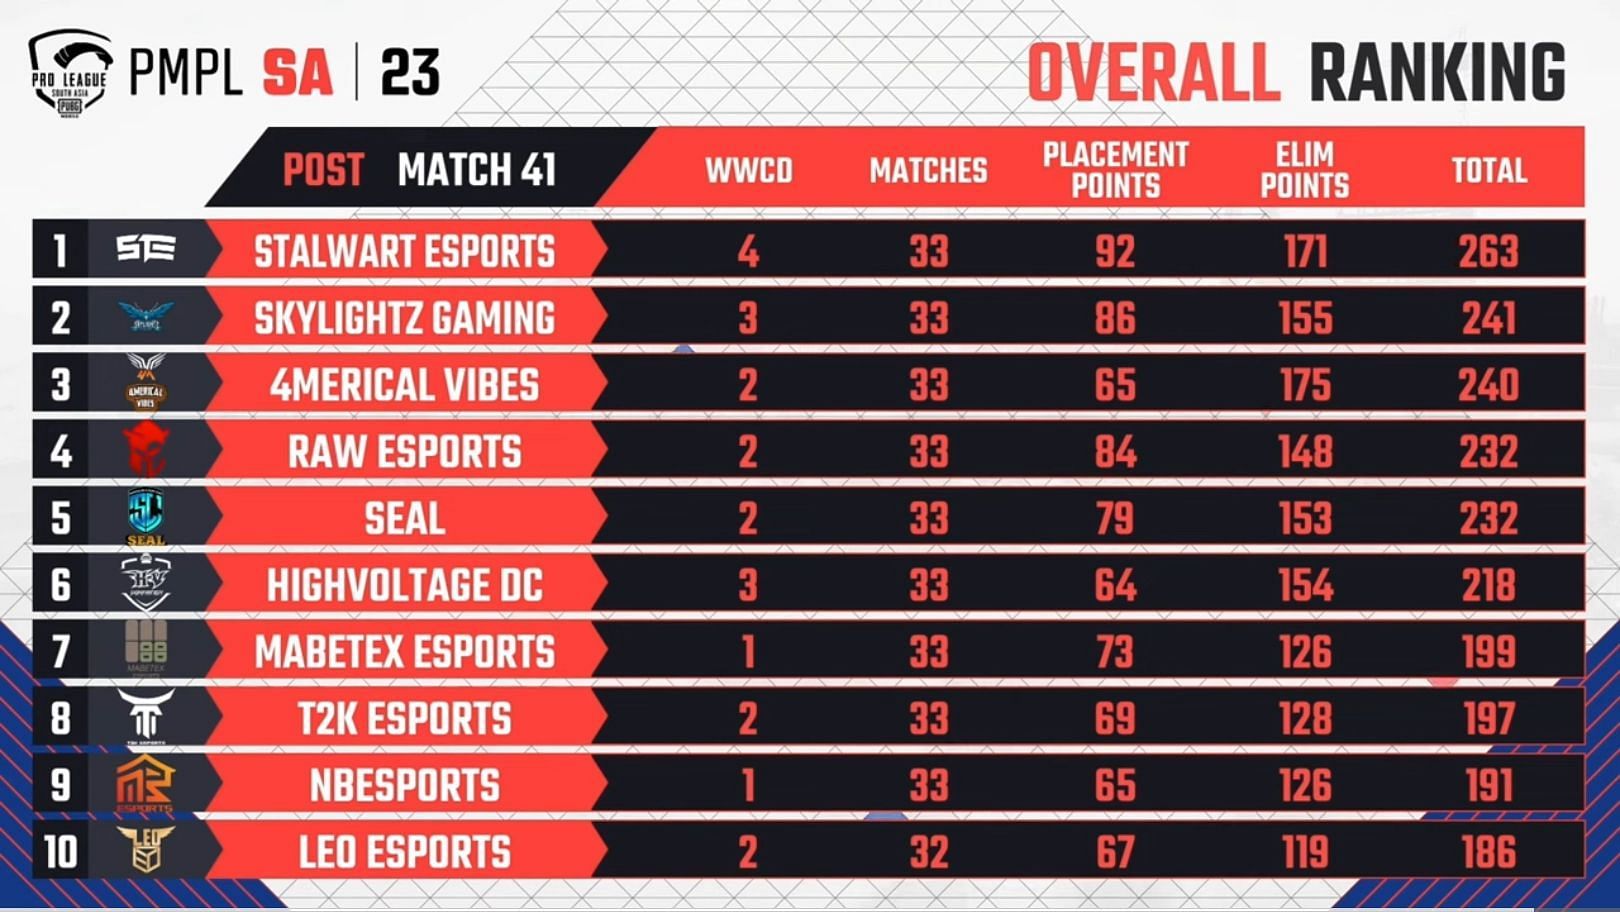 Stalwart Esports jumped to top place after Week 2 Day 3 of PMPL SA (Image via PUBG Mobile)